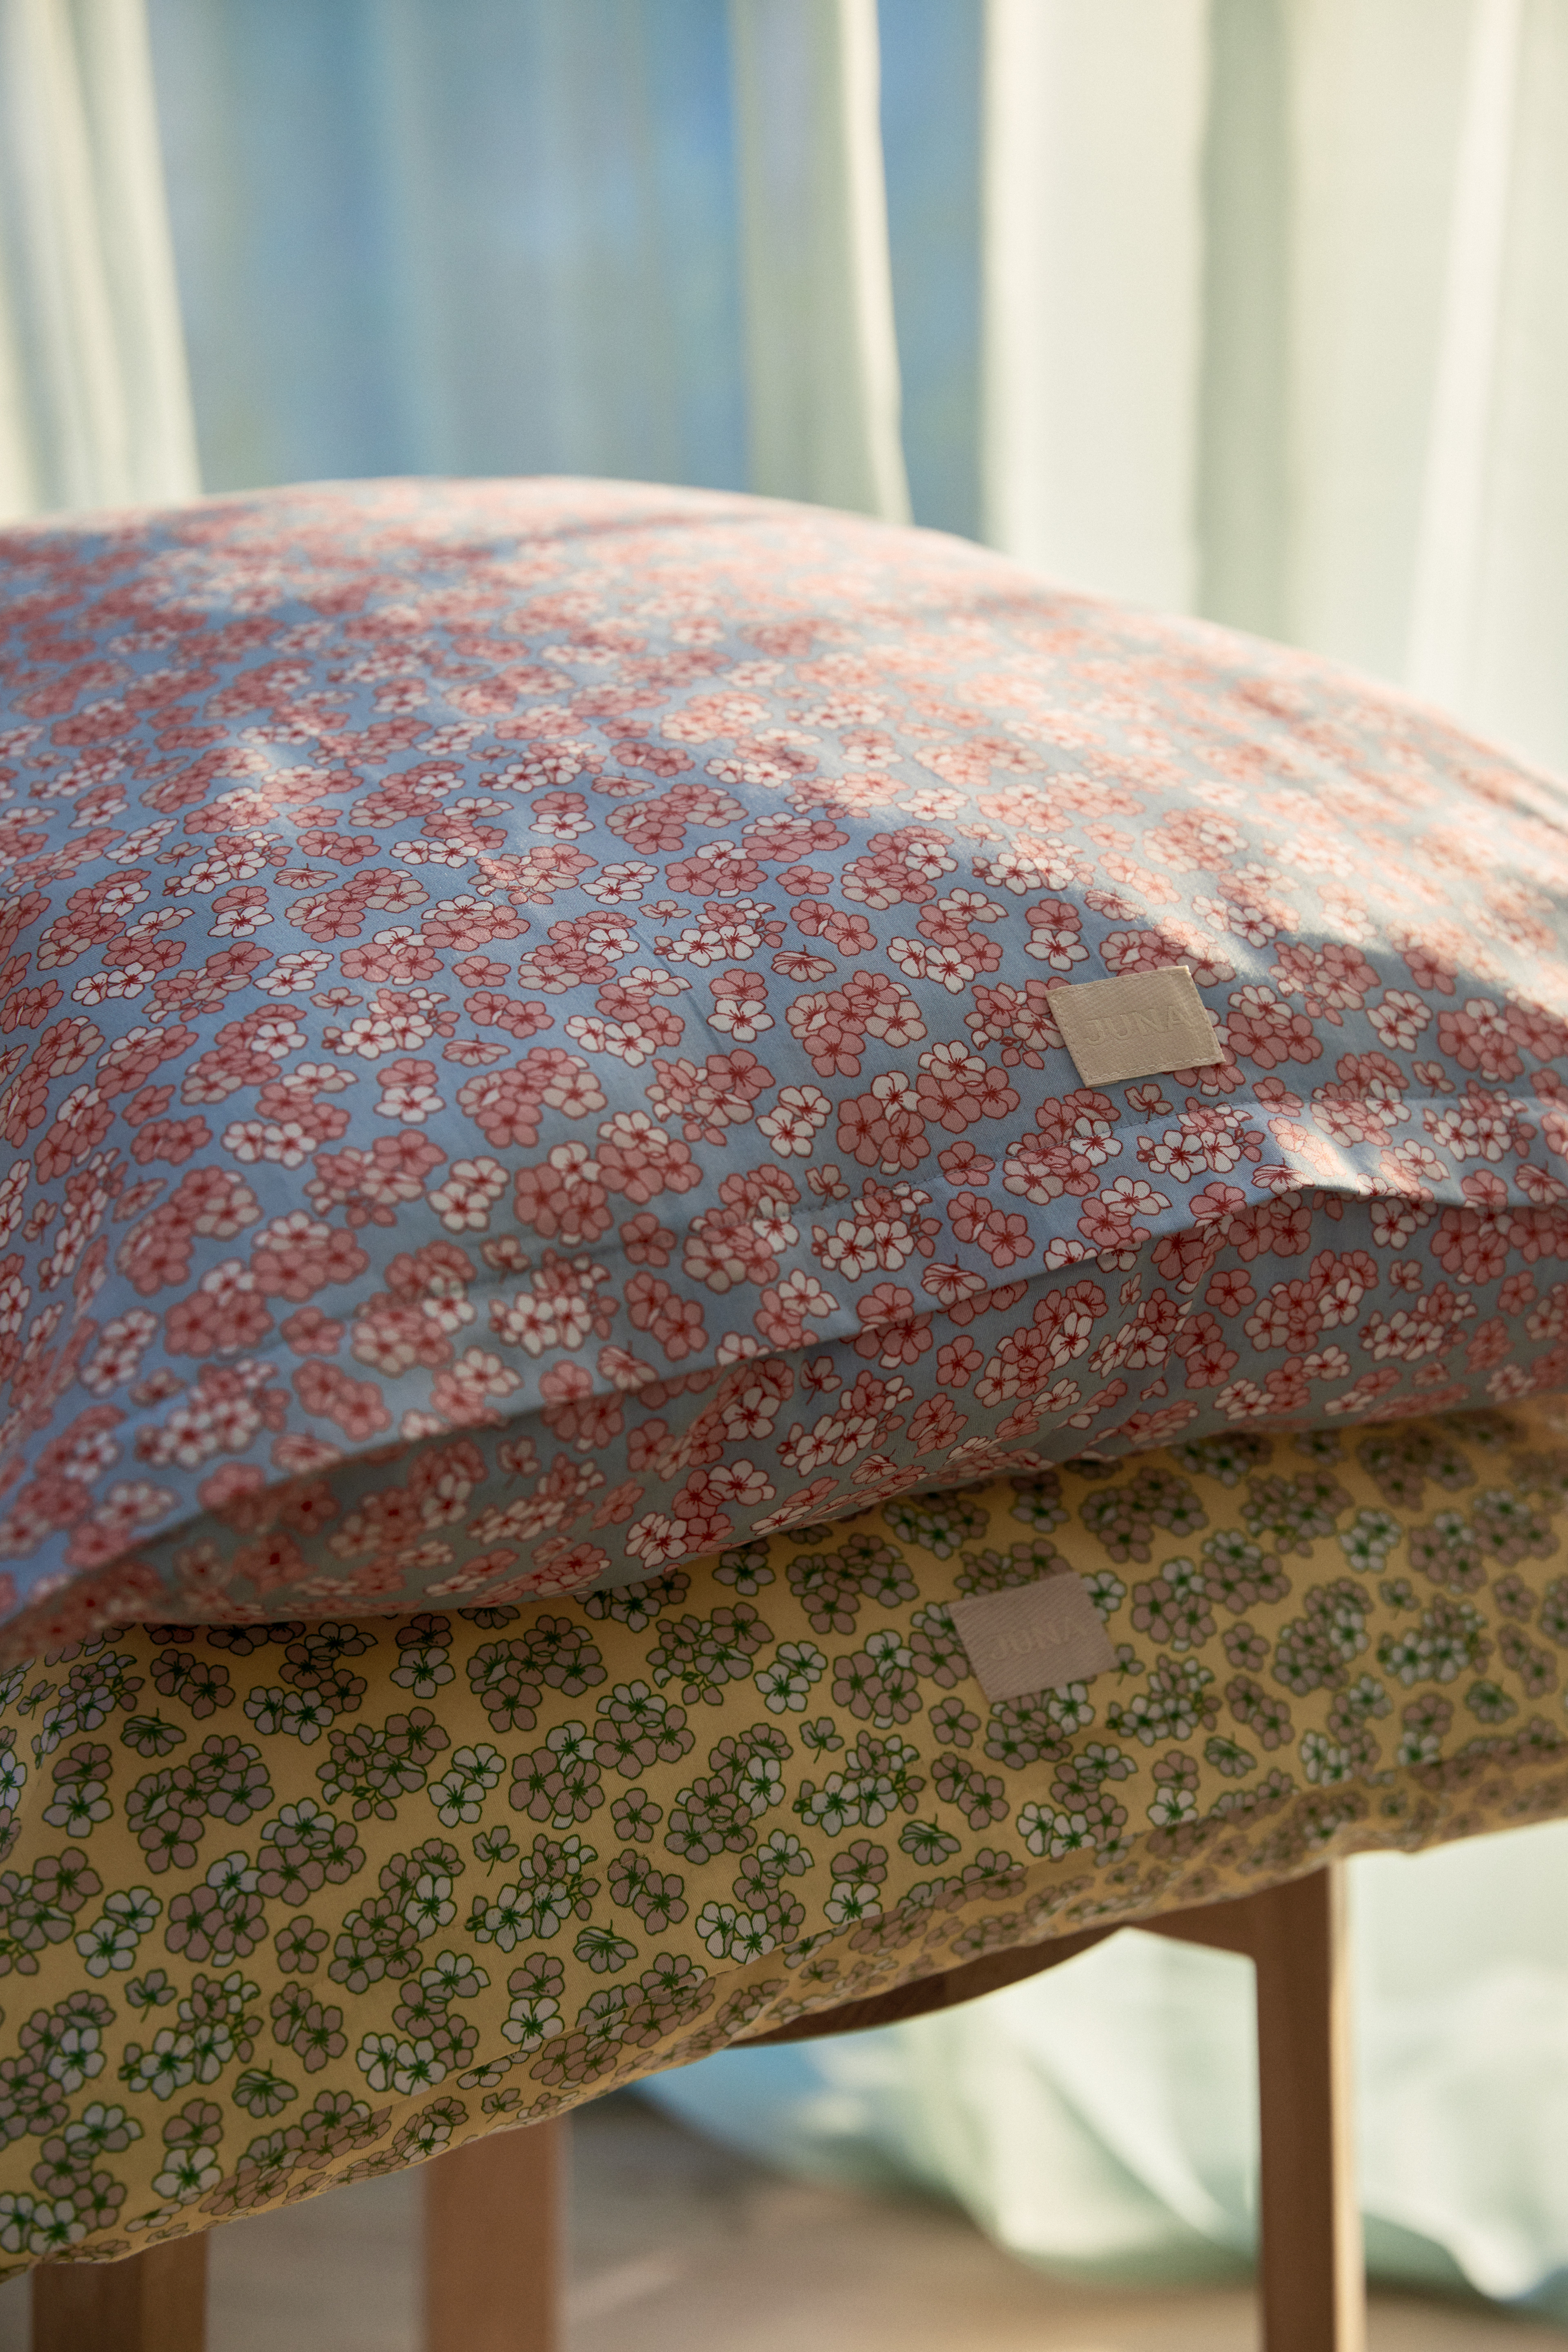 Cushions with floral cushion cover from JUNA on chair